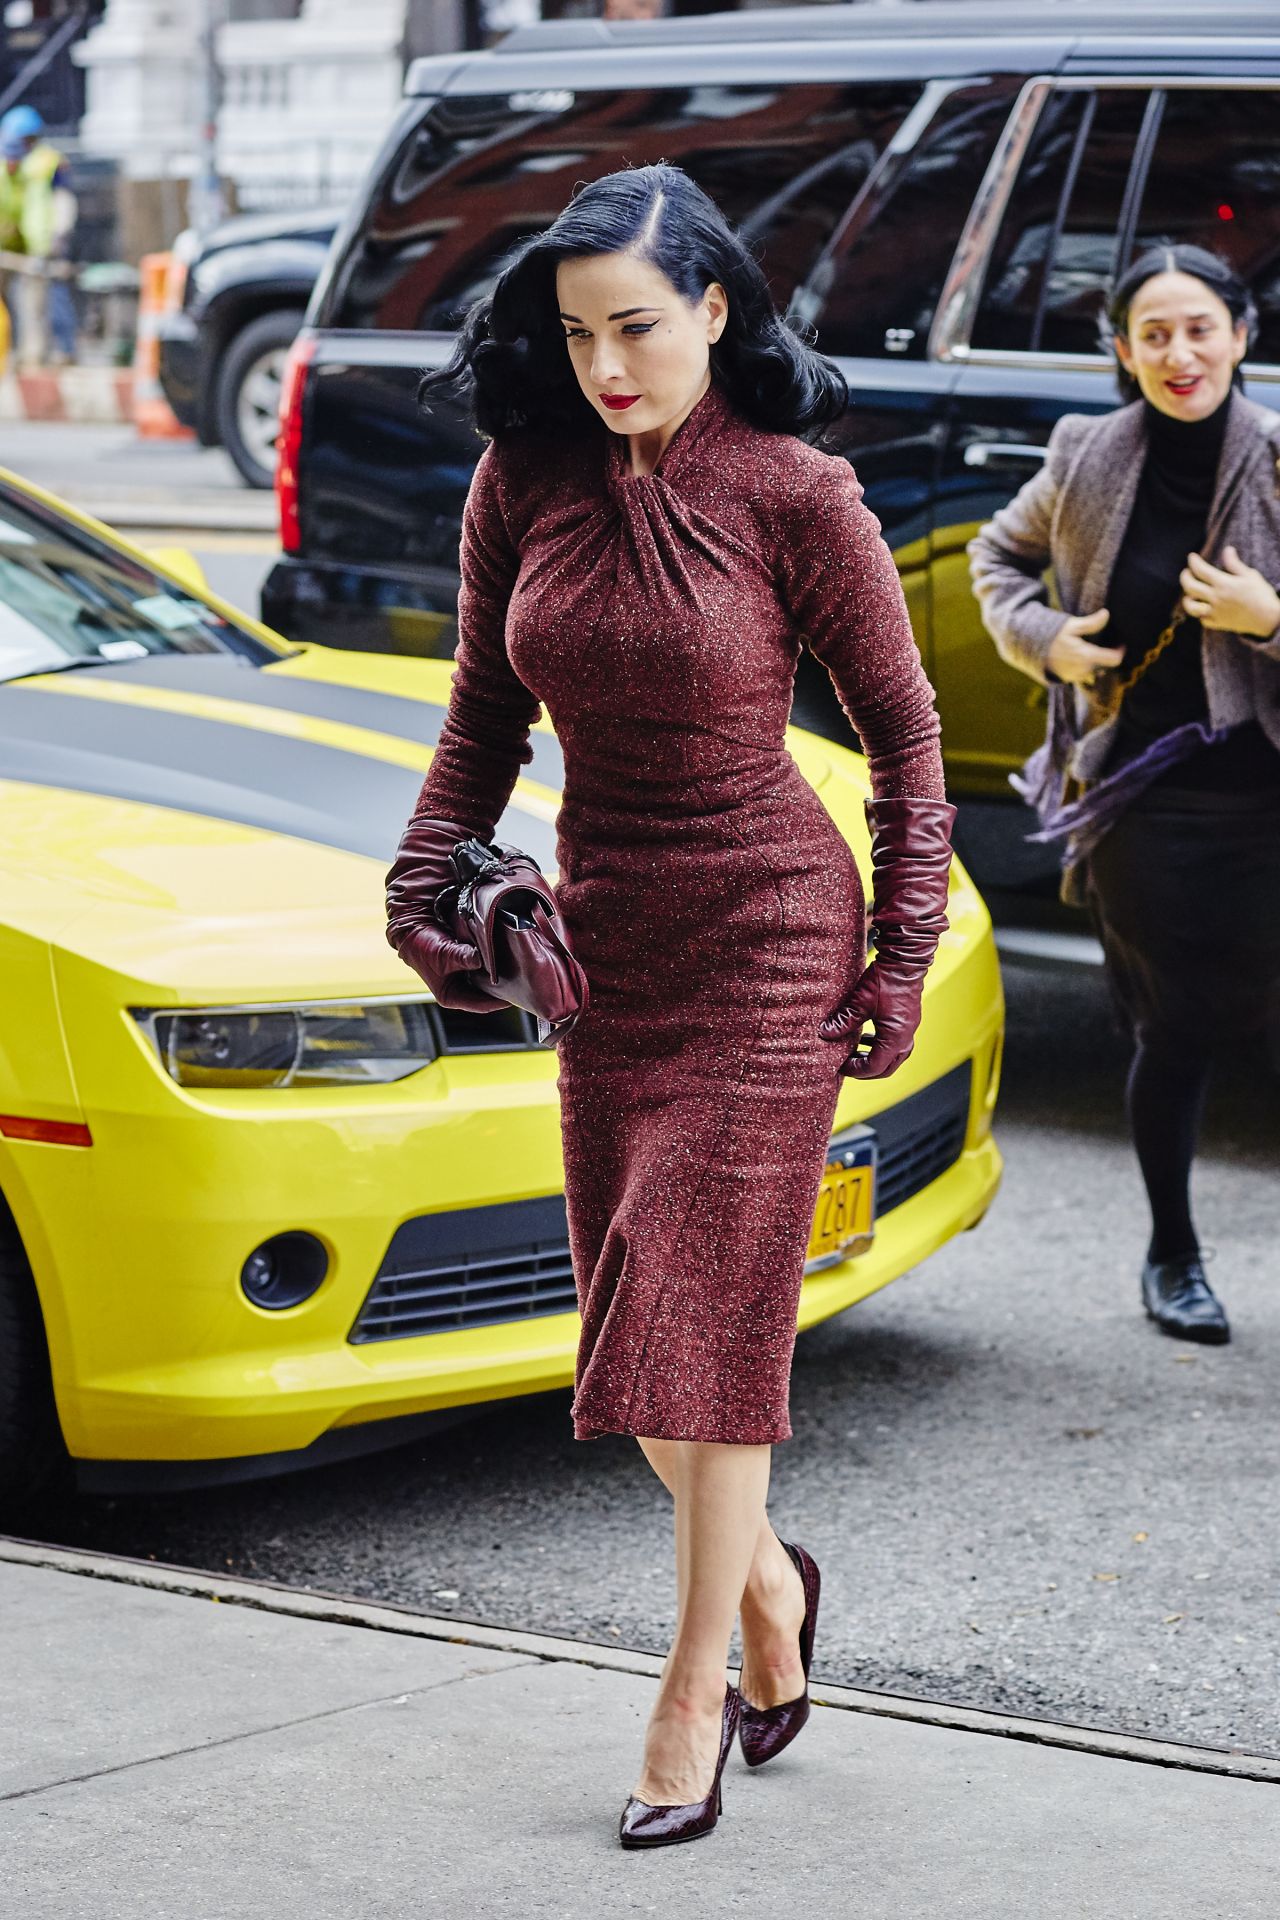 Dita Von Teese in Red Retro Tweed Dress - Arriving at Her Hotel in New ...